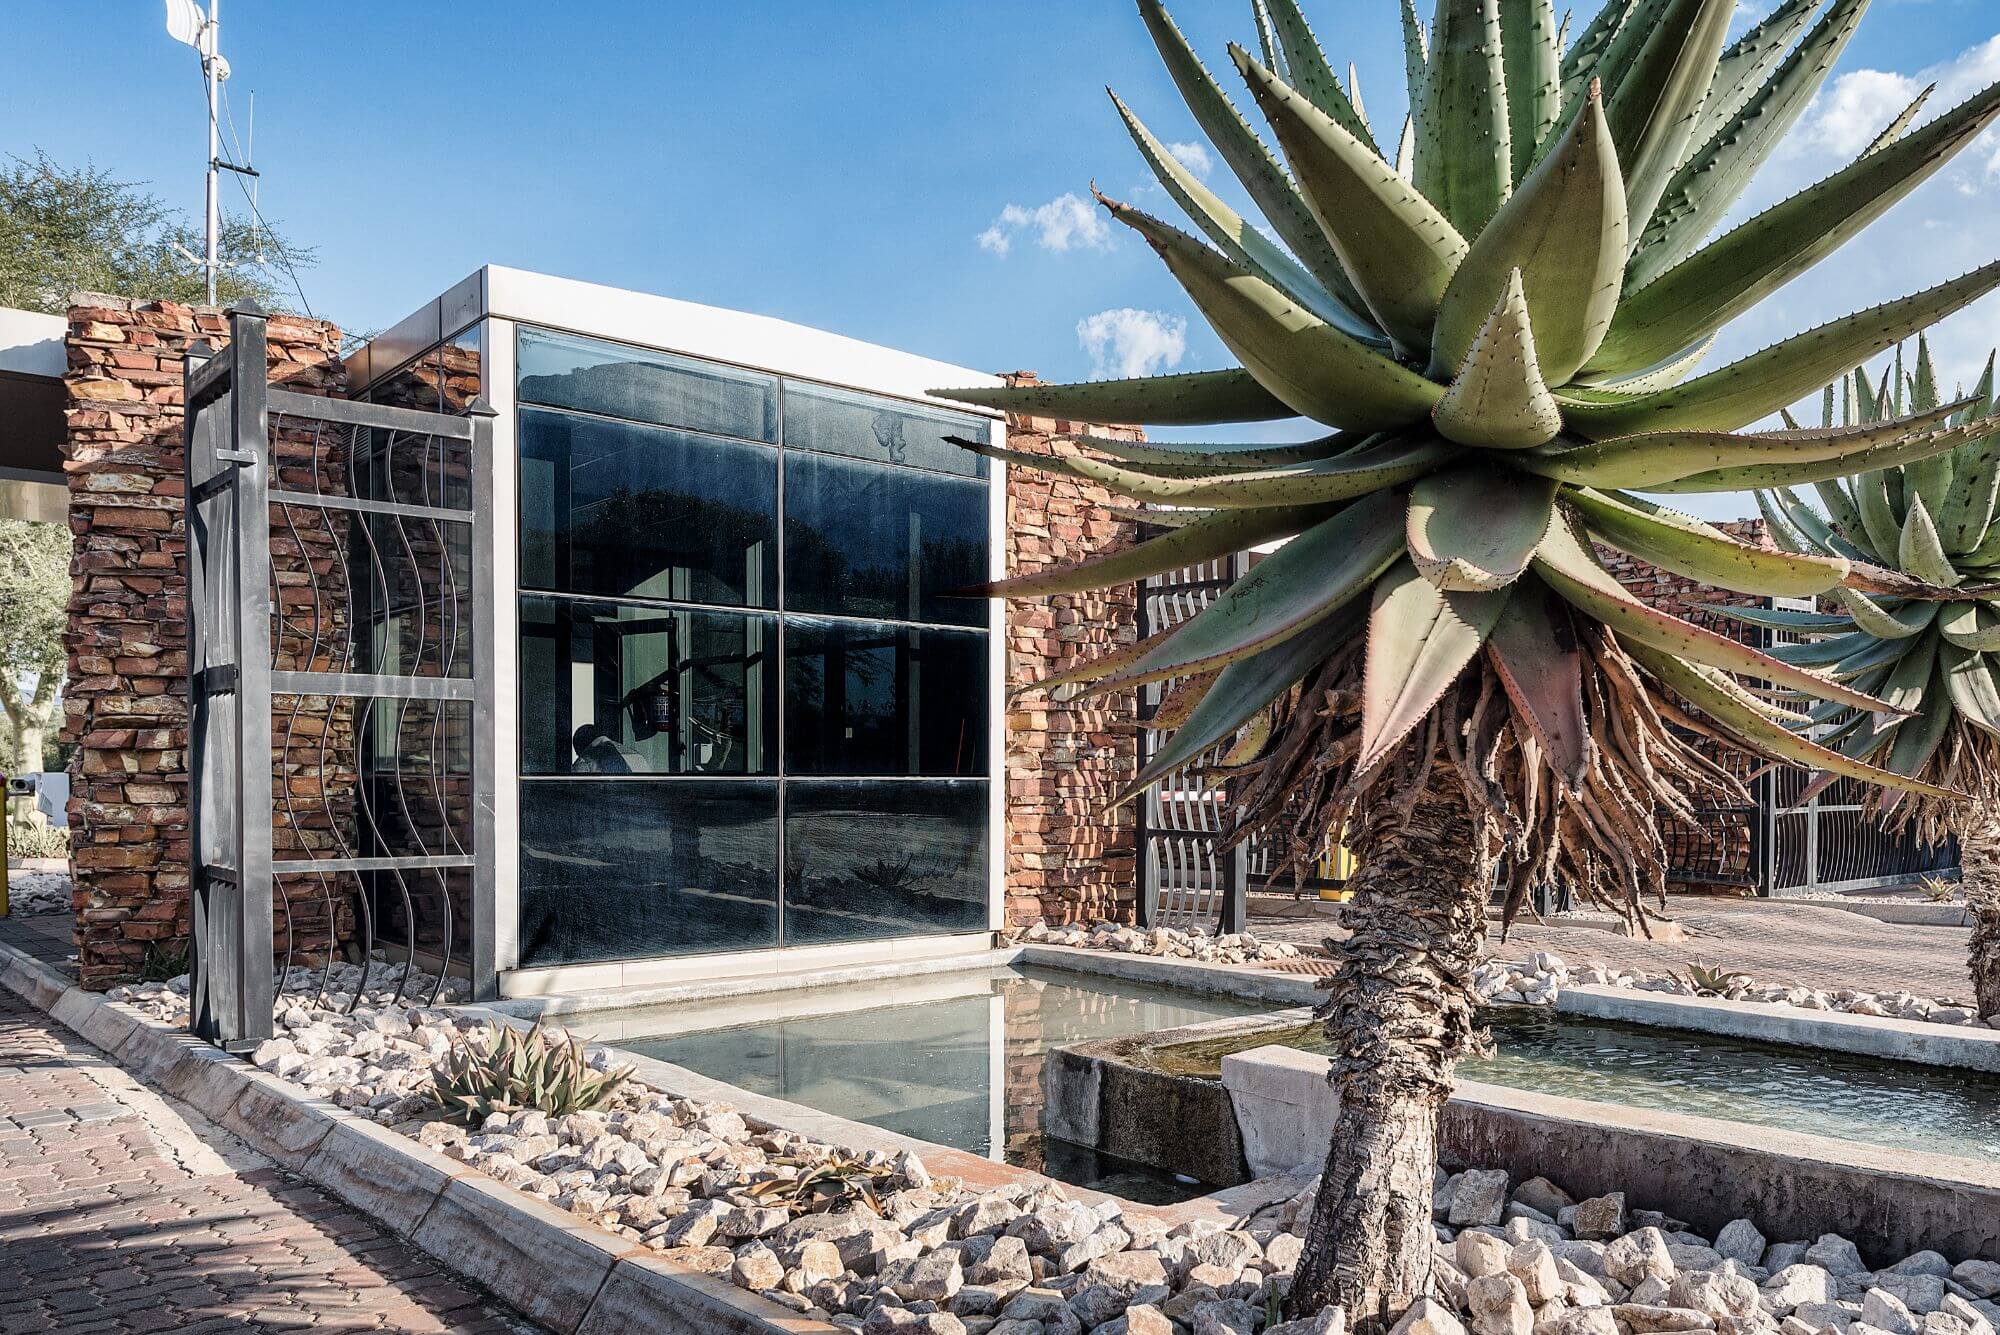 Projectprop, which owns Leloko Lifestyle and Eco Estate in Hartbeespoort, is seeking a solid new buyer, or buyers, for this idyllic estate following a resolution by the shareholders to disinvest in the company through the sale of all of their shares.